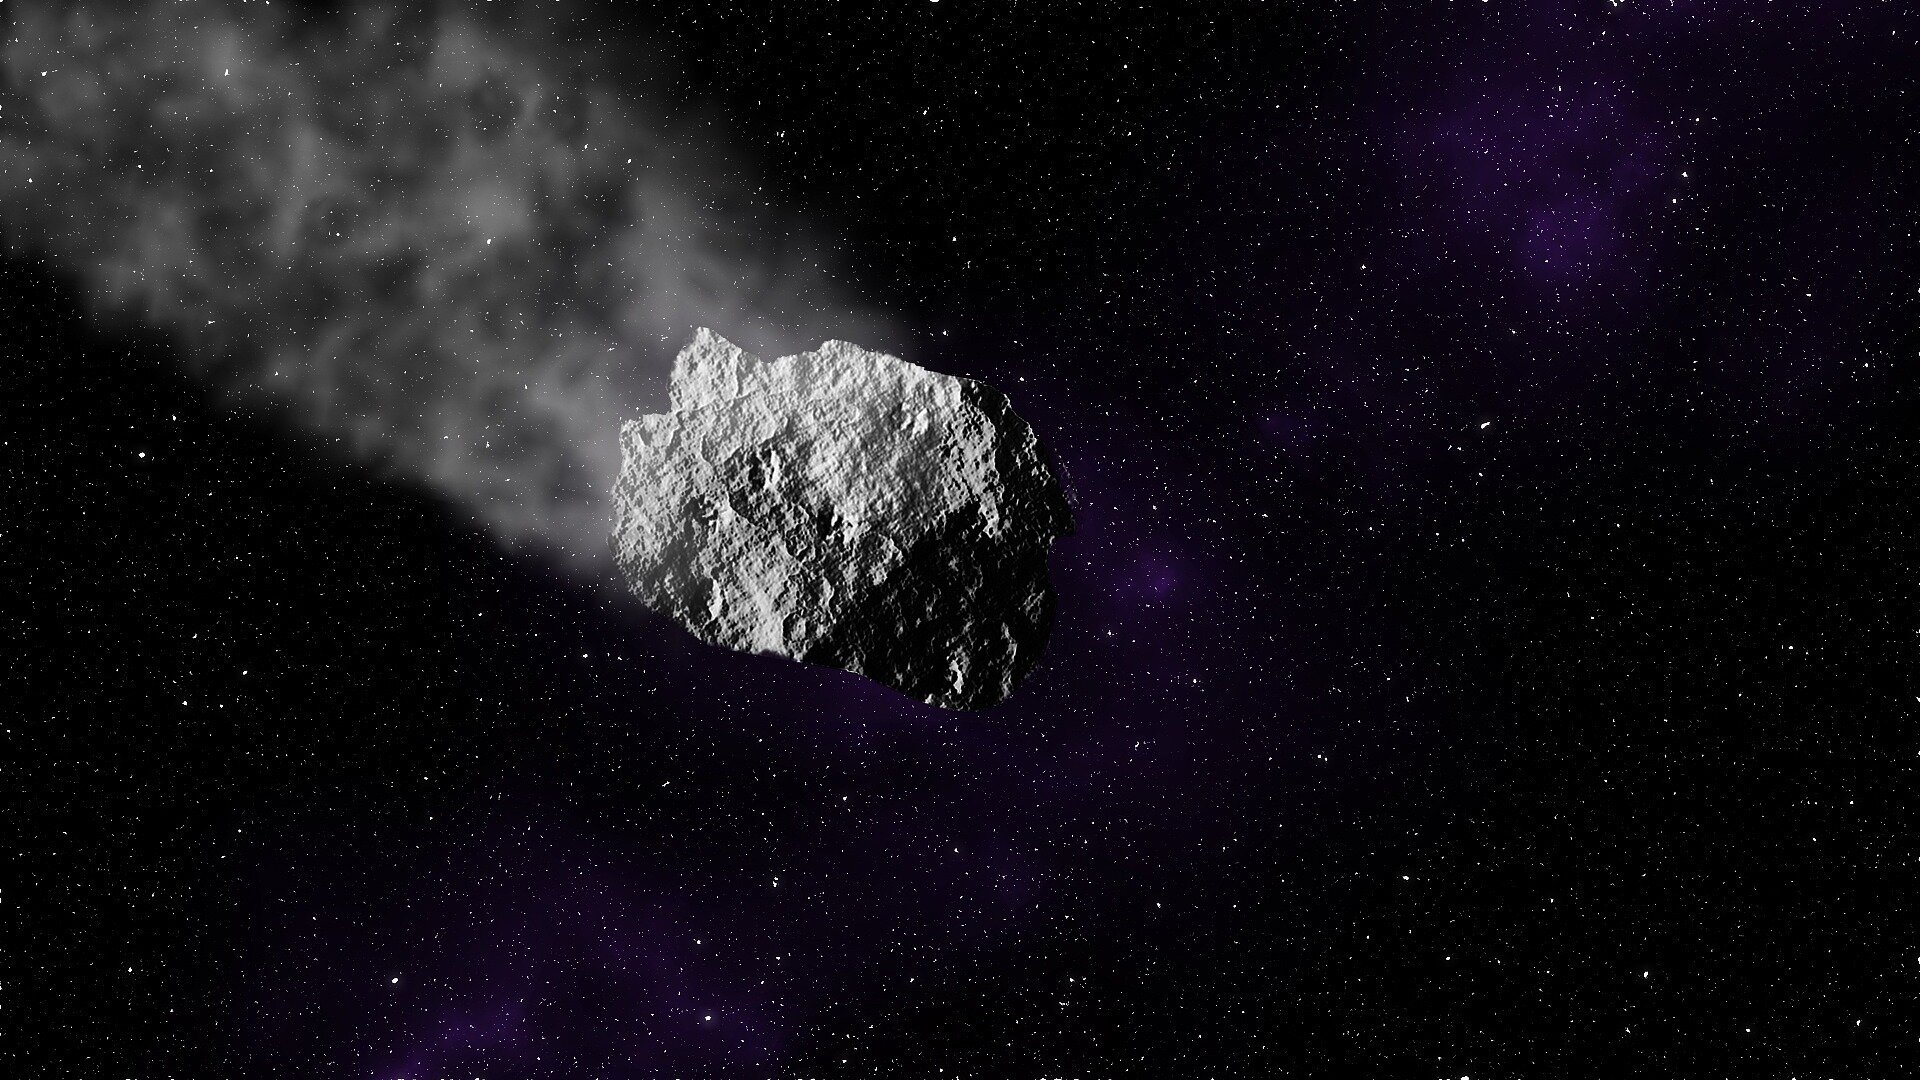 Arecibo observatory scientists help unravel surprise asteroid mystery